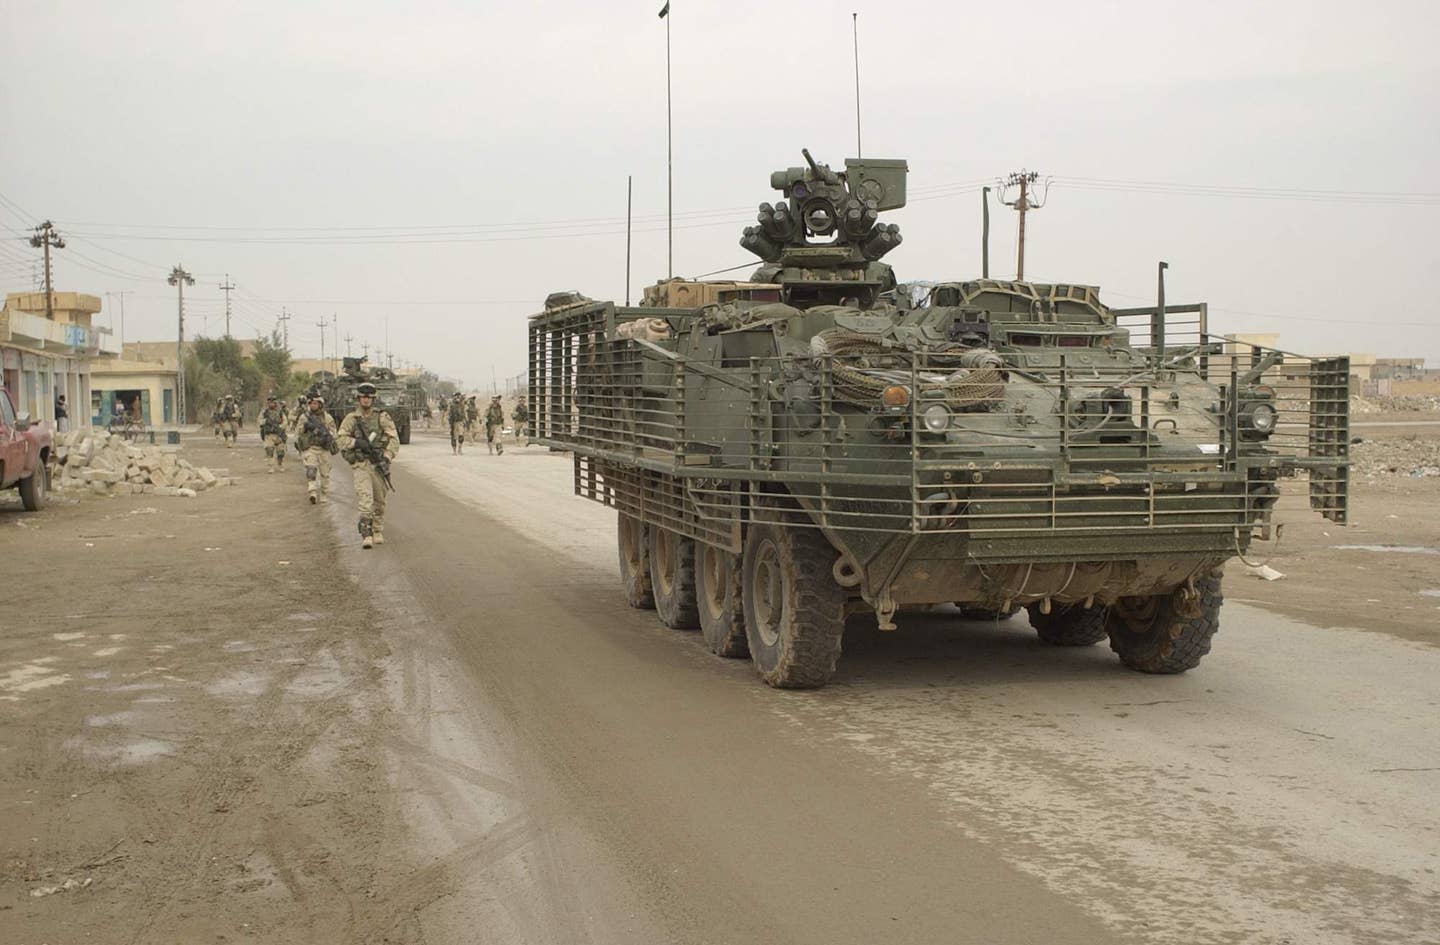 Soldiers of Battle Company, 5th Battalion - 20 Infantry, 3rd Brigade, 2nd Infantry Division (Stryker Brigade Combat Team) conduct route reconnaissance, a presence patrol, a civilian assessment, and combat operations contributing to the stability of Samarra, Iraq, on December 15, 2003. The 3rd Brigade, 2nd Infantry Division (Stryker Brigade Combat Team) is under the operational control of the 4th Infantry Division. (U.S. Army photo by Spc. Clinton Tarzia, Released)